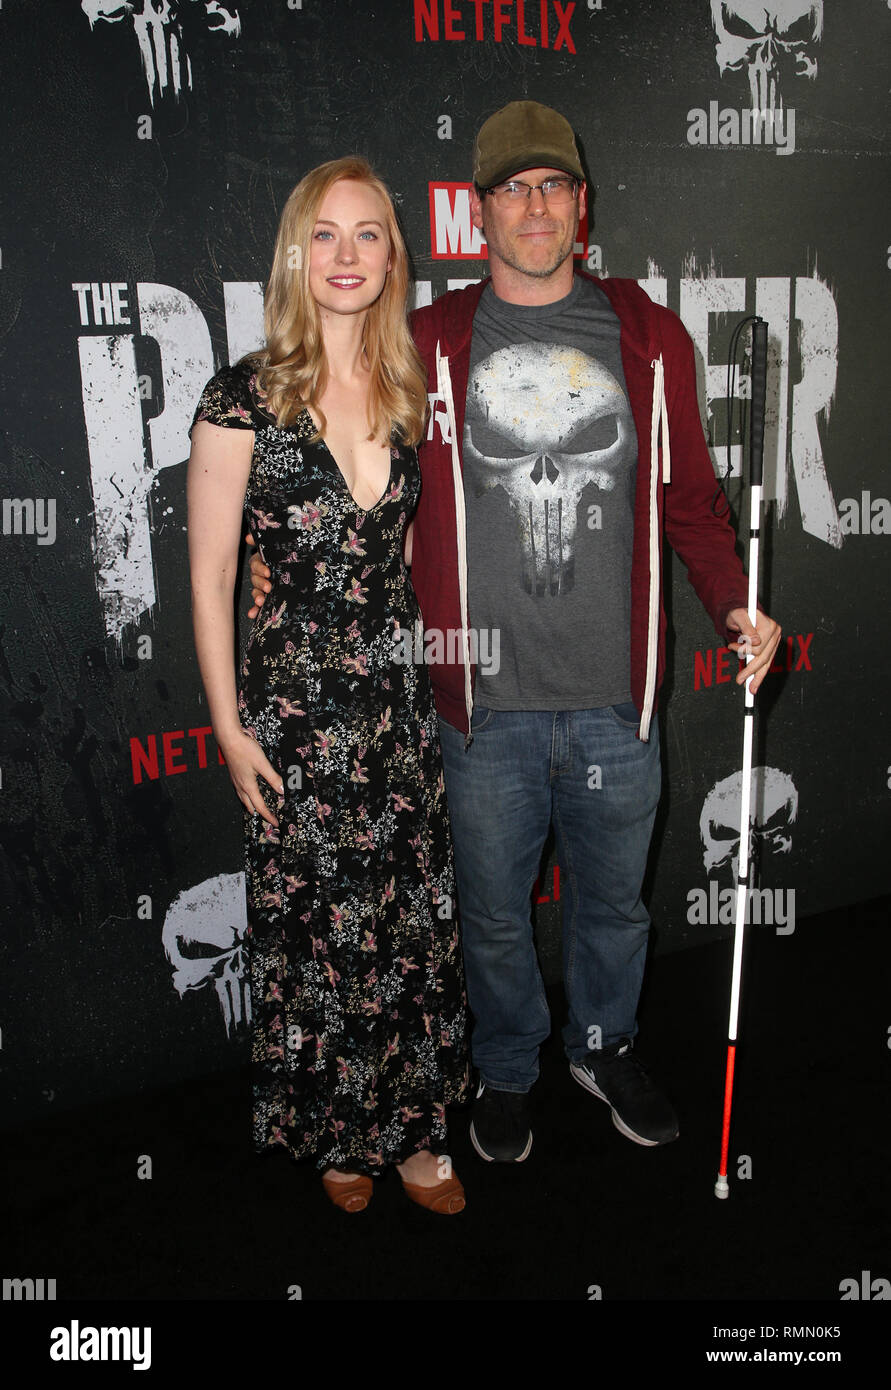 Marvel's 'The Punisher' Los Angeles Premiere  Featuring: Deborah Ann Woll, E.J. Scott Where: Hollywood, California, United States When: 14 Jan 2019 Credit: FayesVision/WENN.com Stock Photo